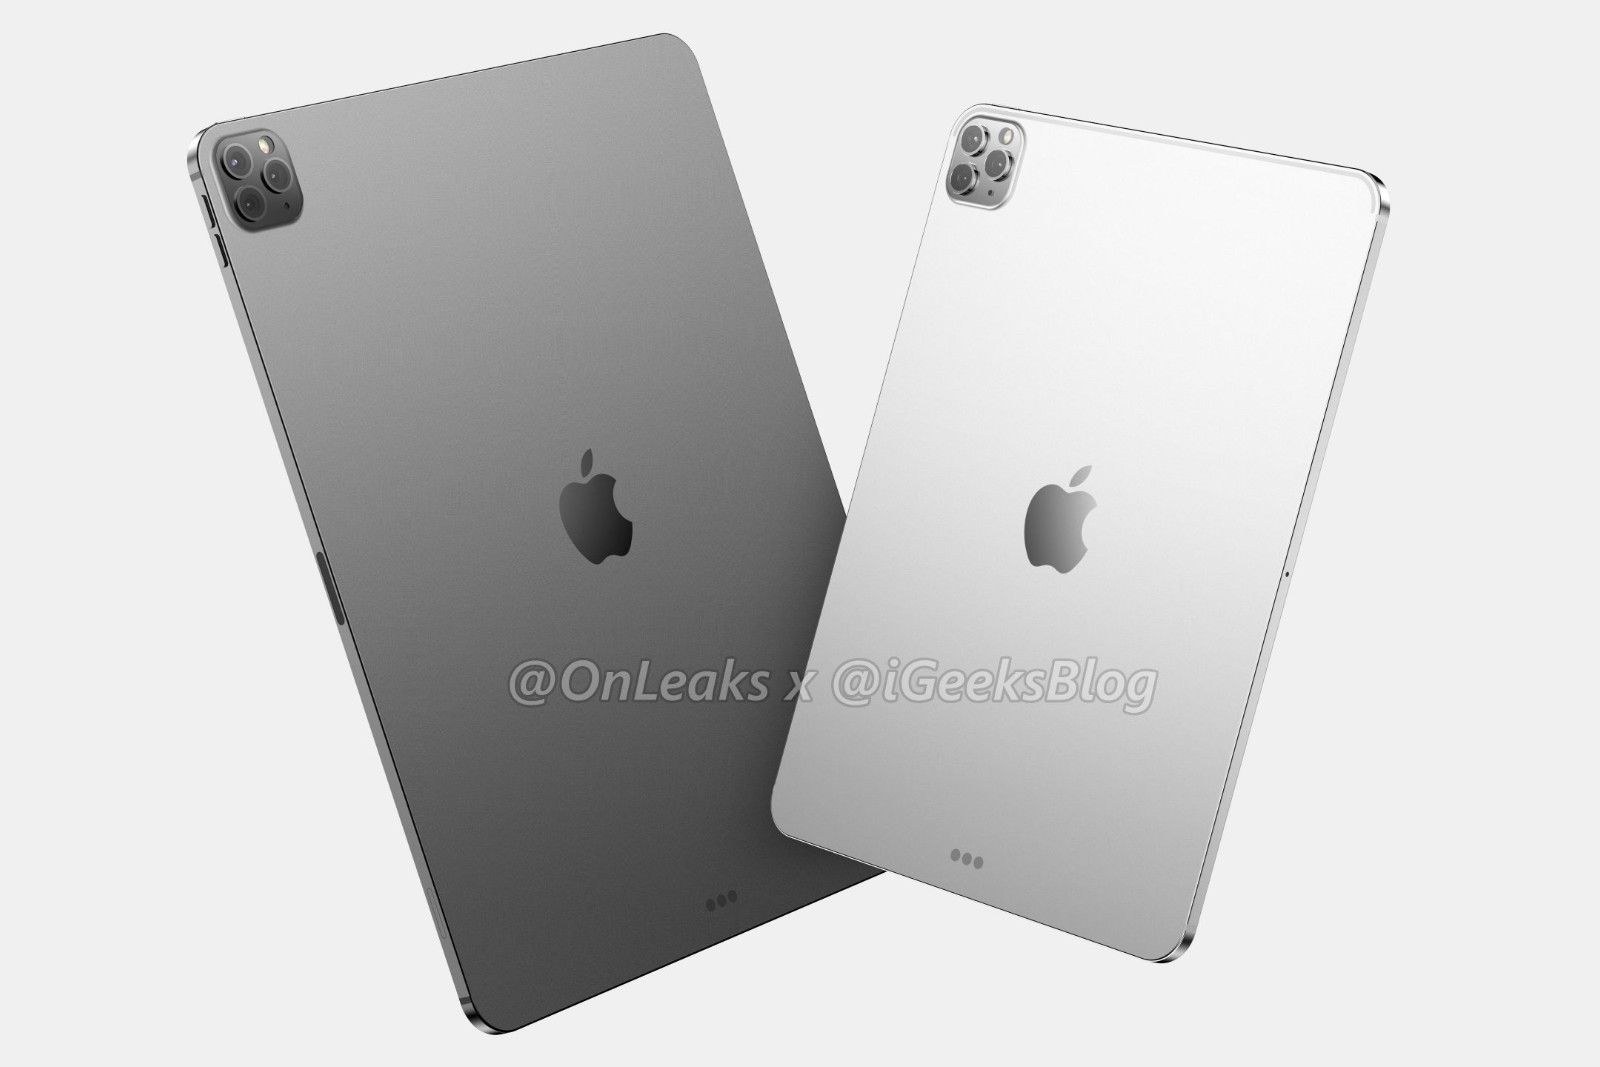 New 12-inch iPad Pro could be launching in March despite manufacturing slow down image 1